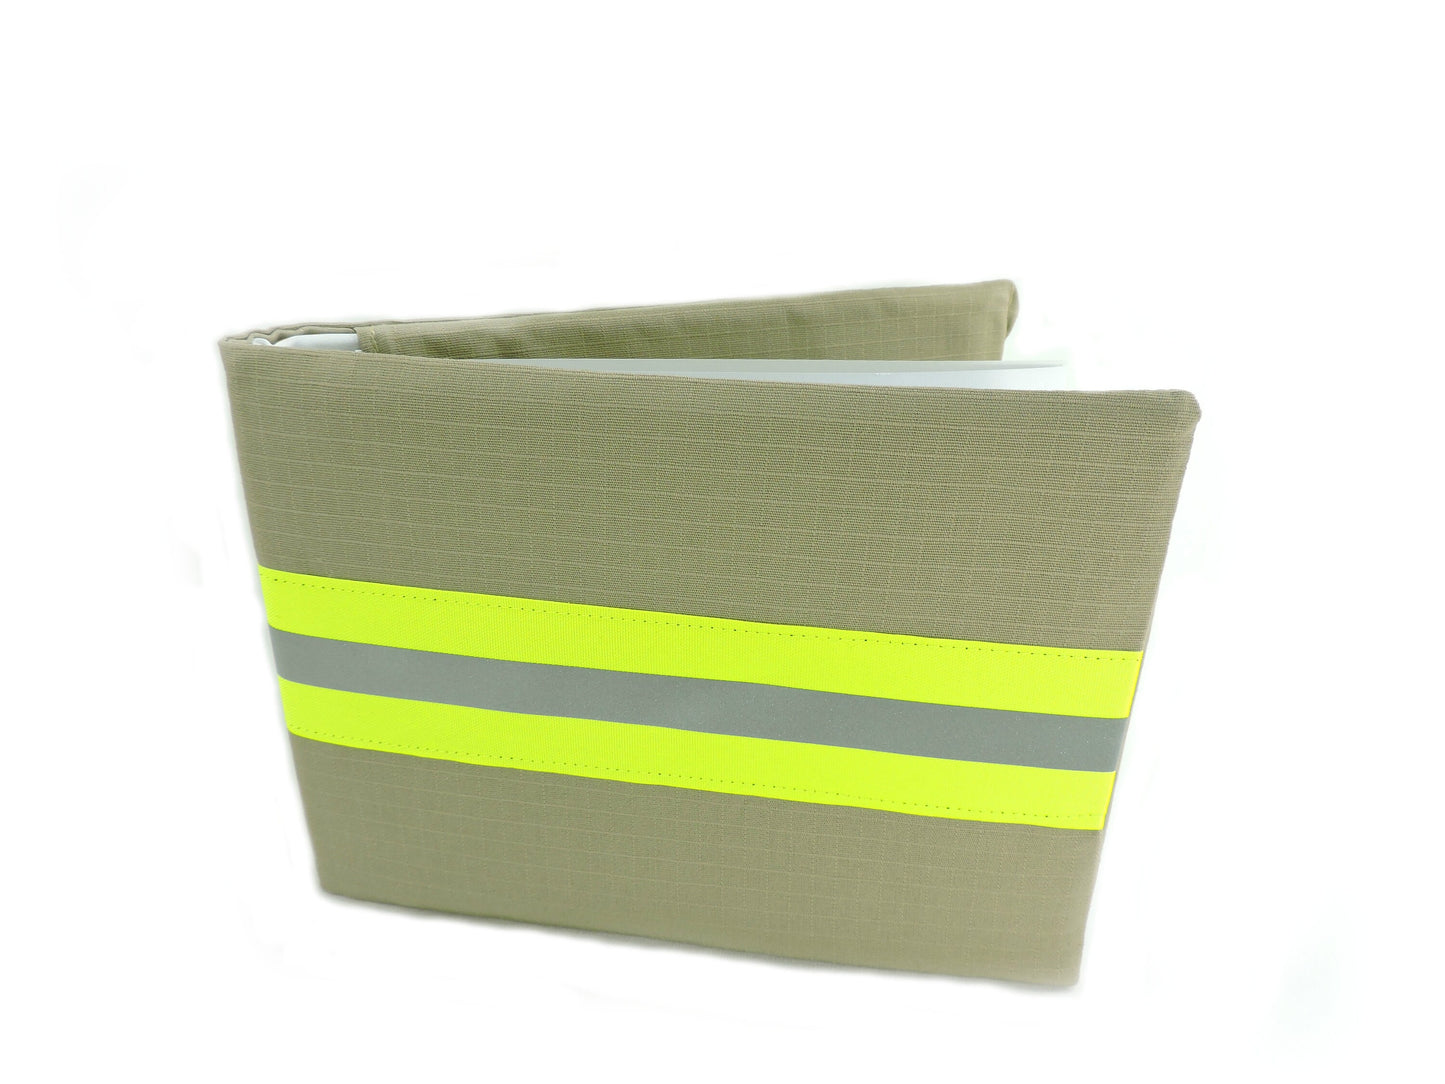 Tan Fabric and Neon Yellow Reflective Tape Firefighter Wedding Guestbook no name